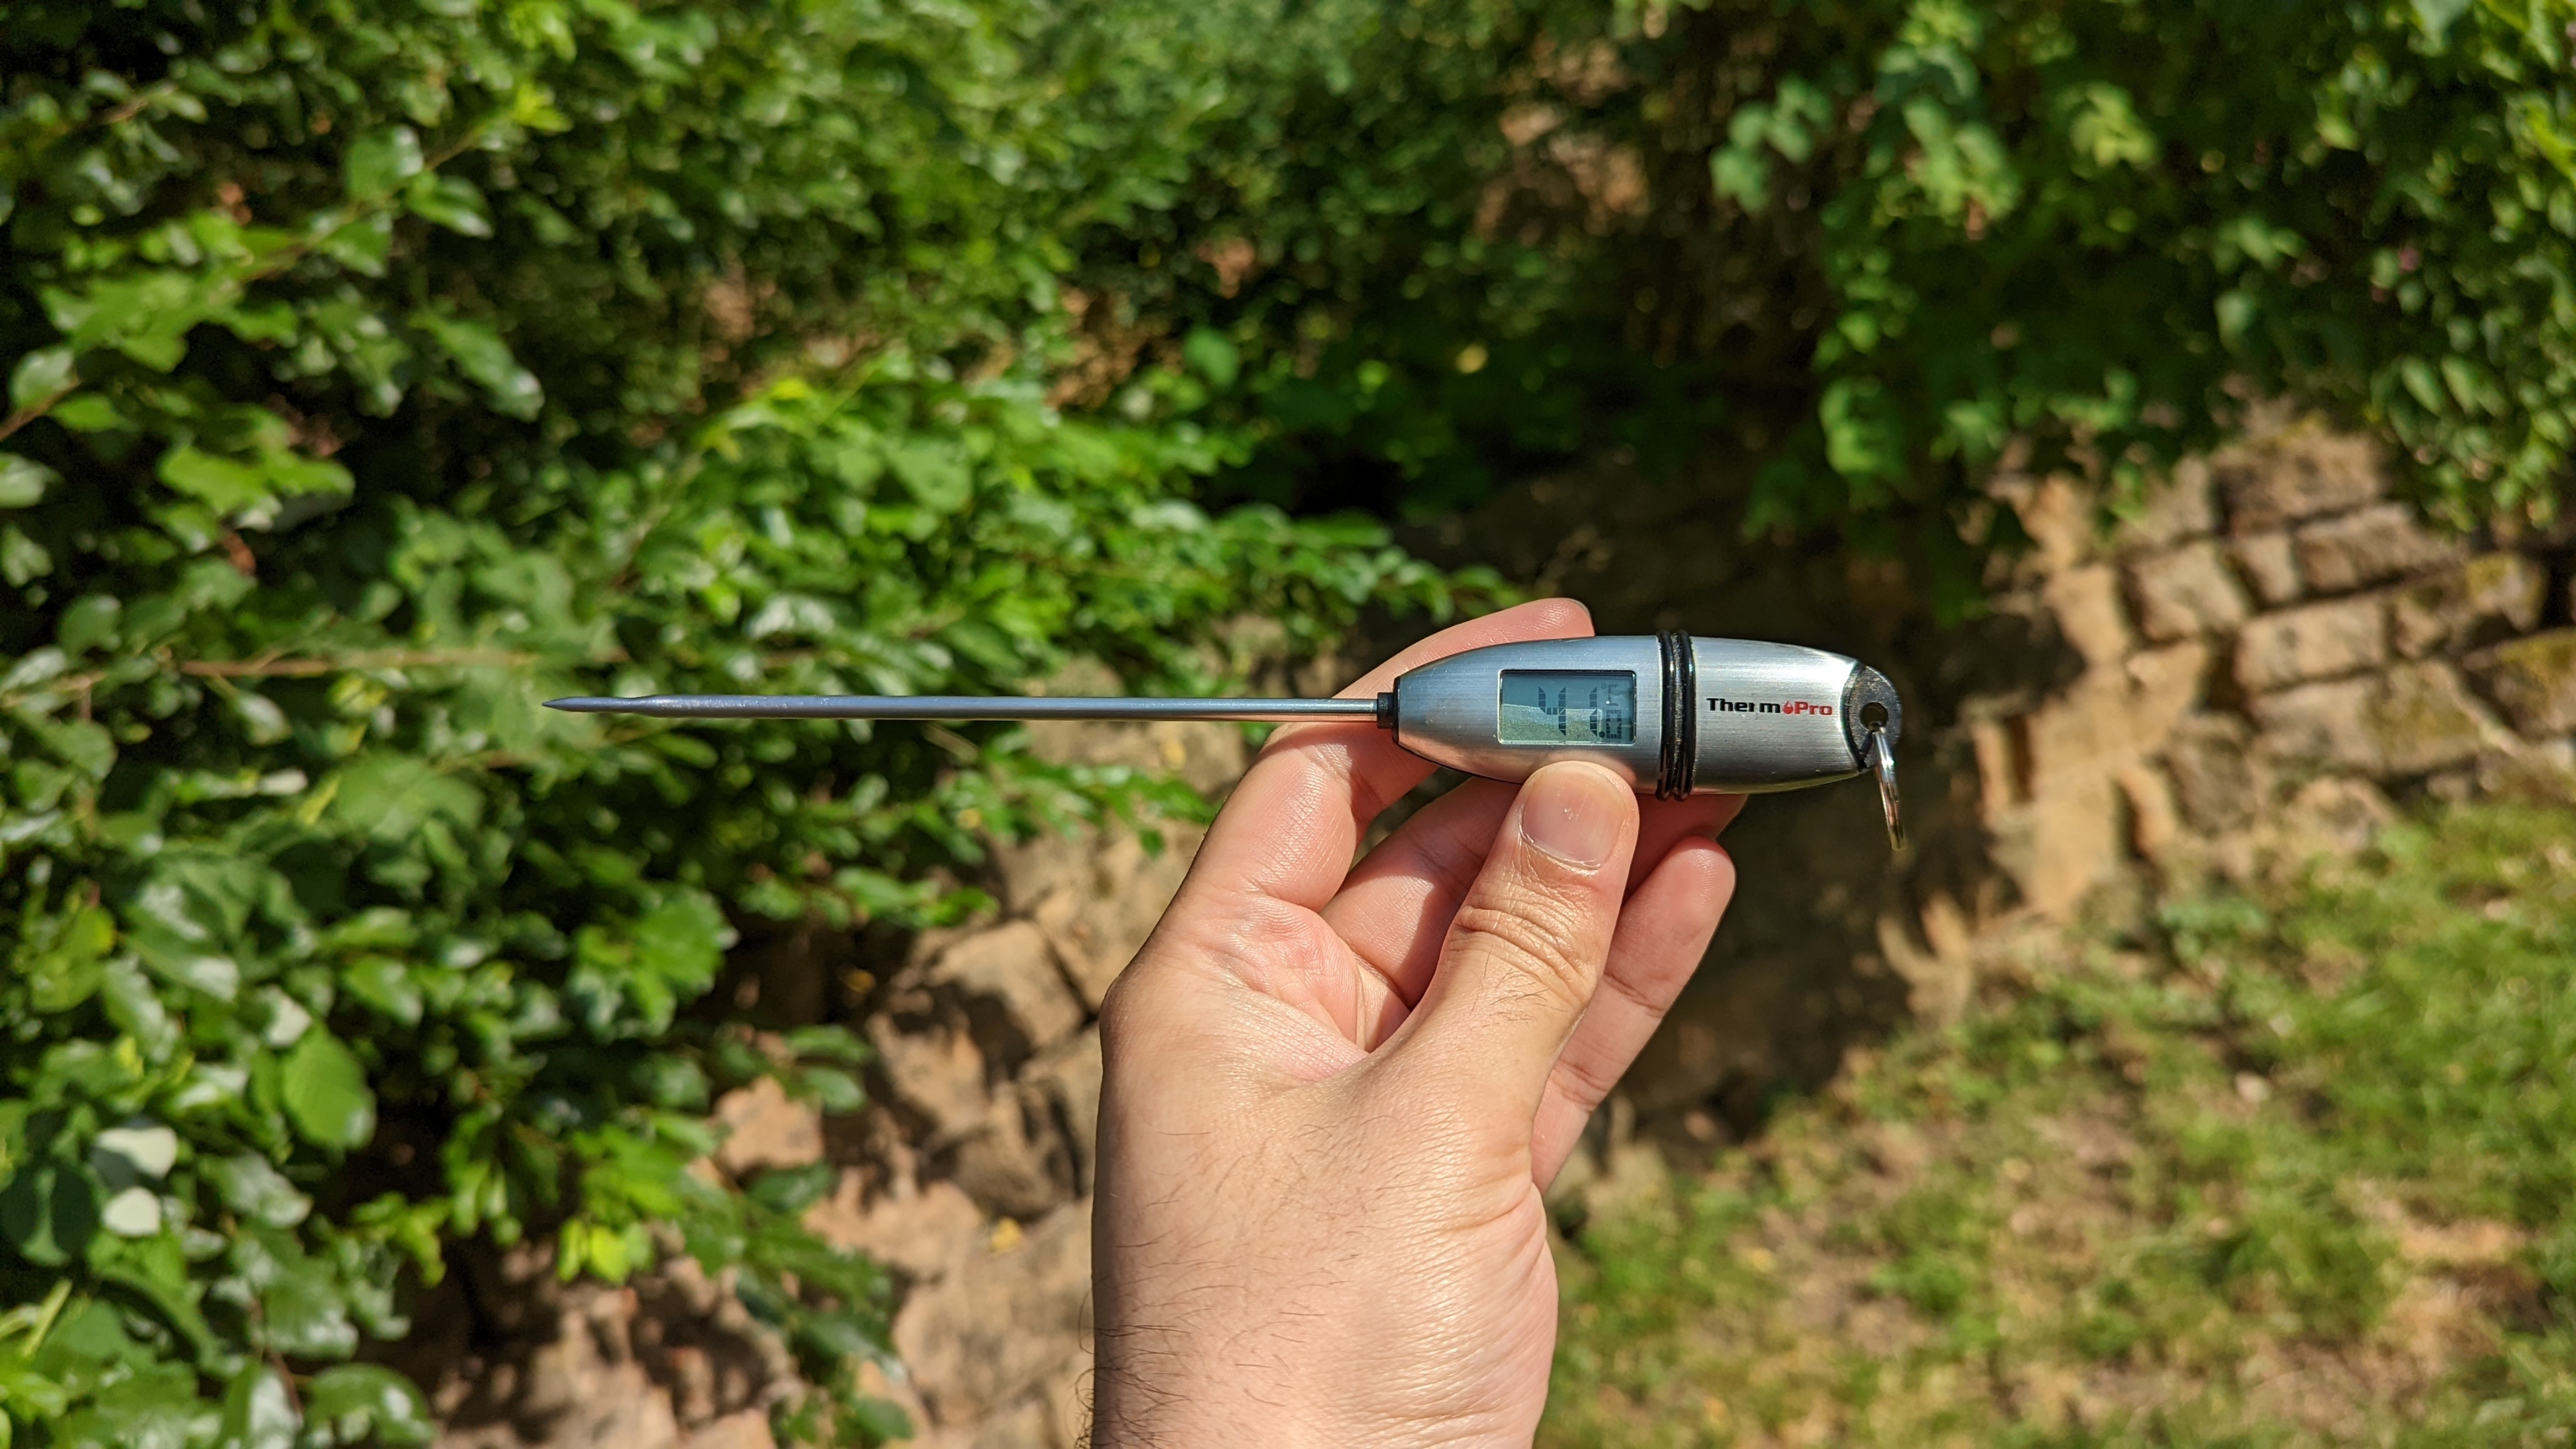 Jamie holding a meat thermometer in the sun, showing a temperature of 41 degrees Celsius